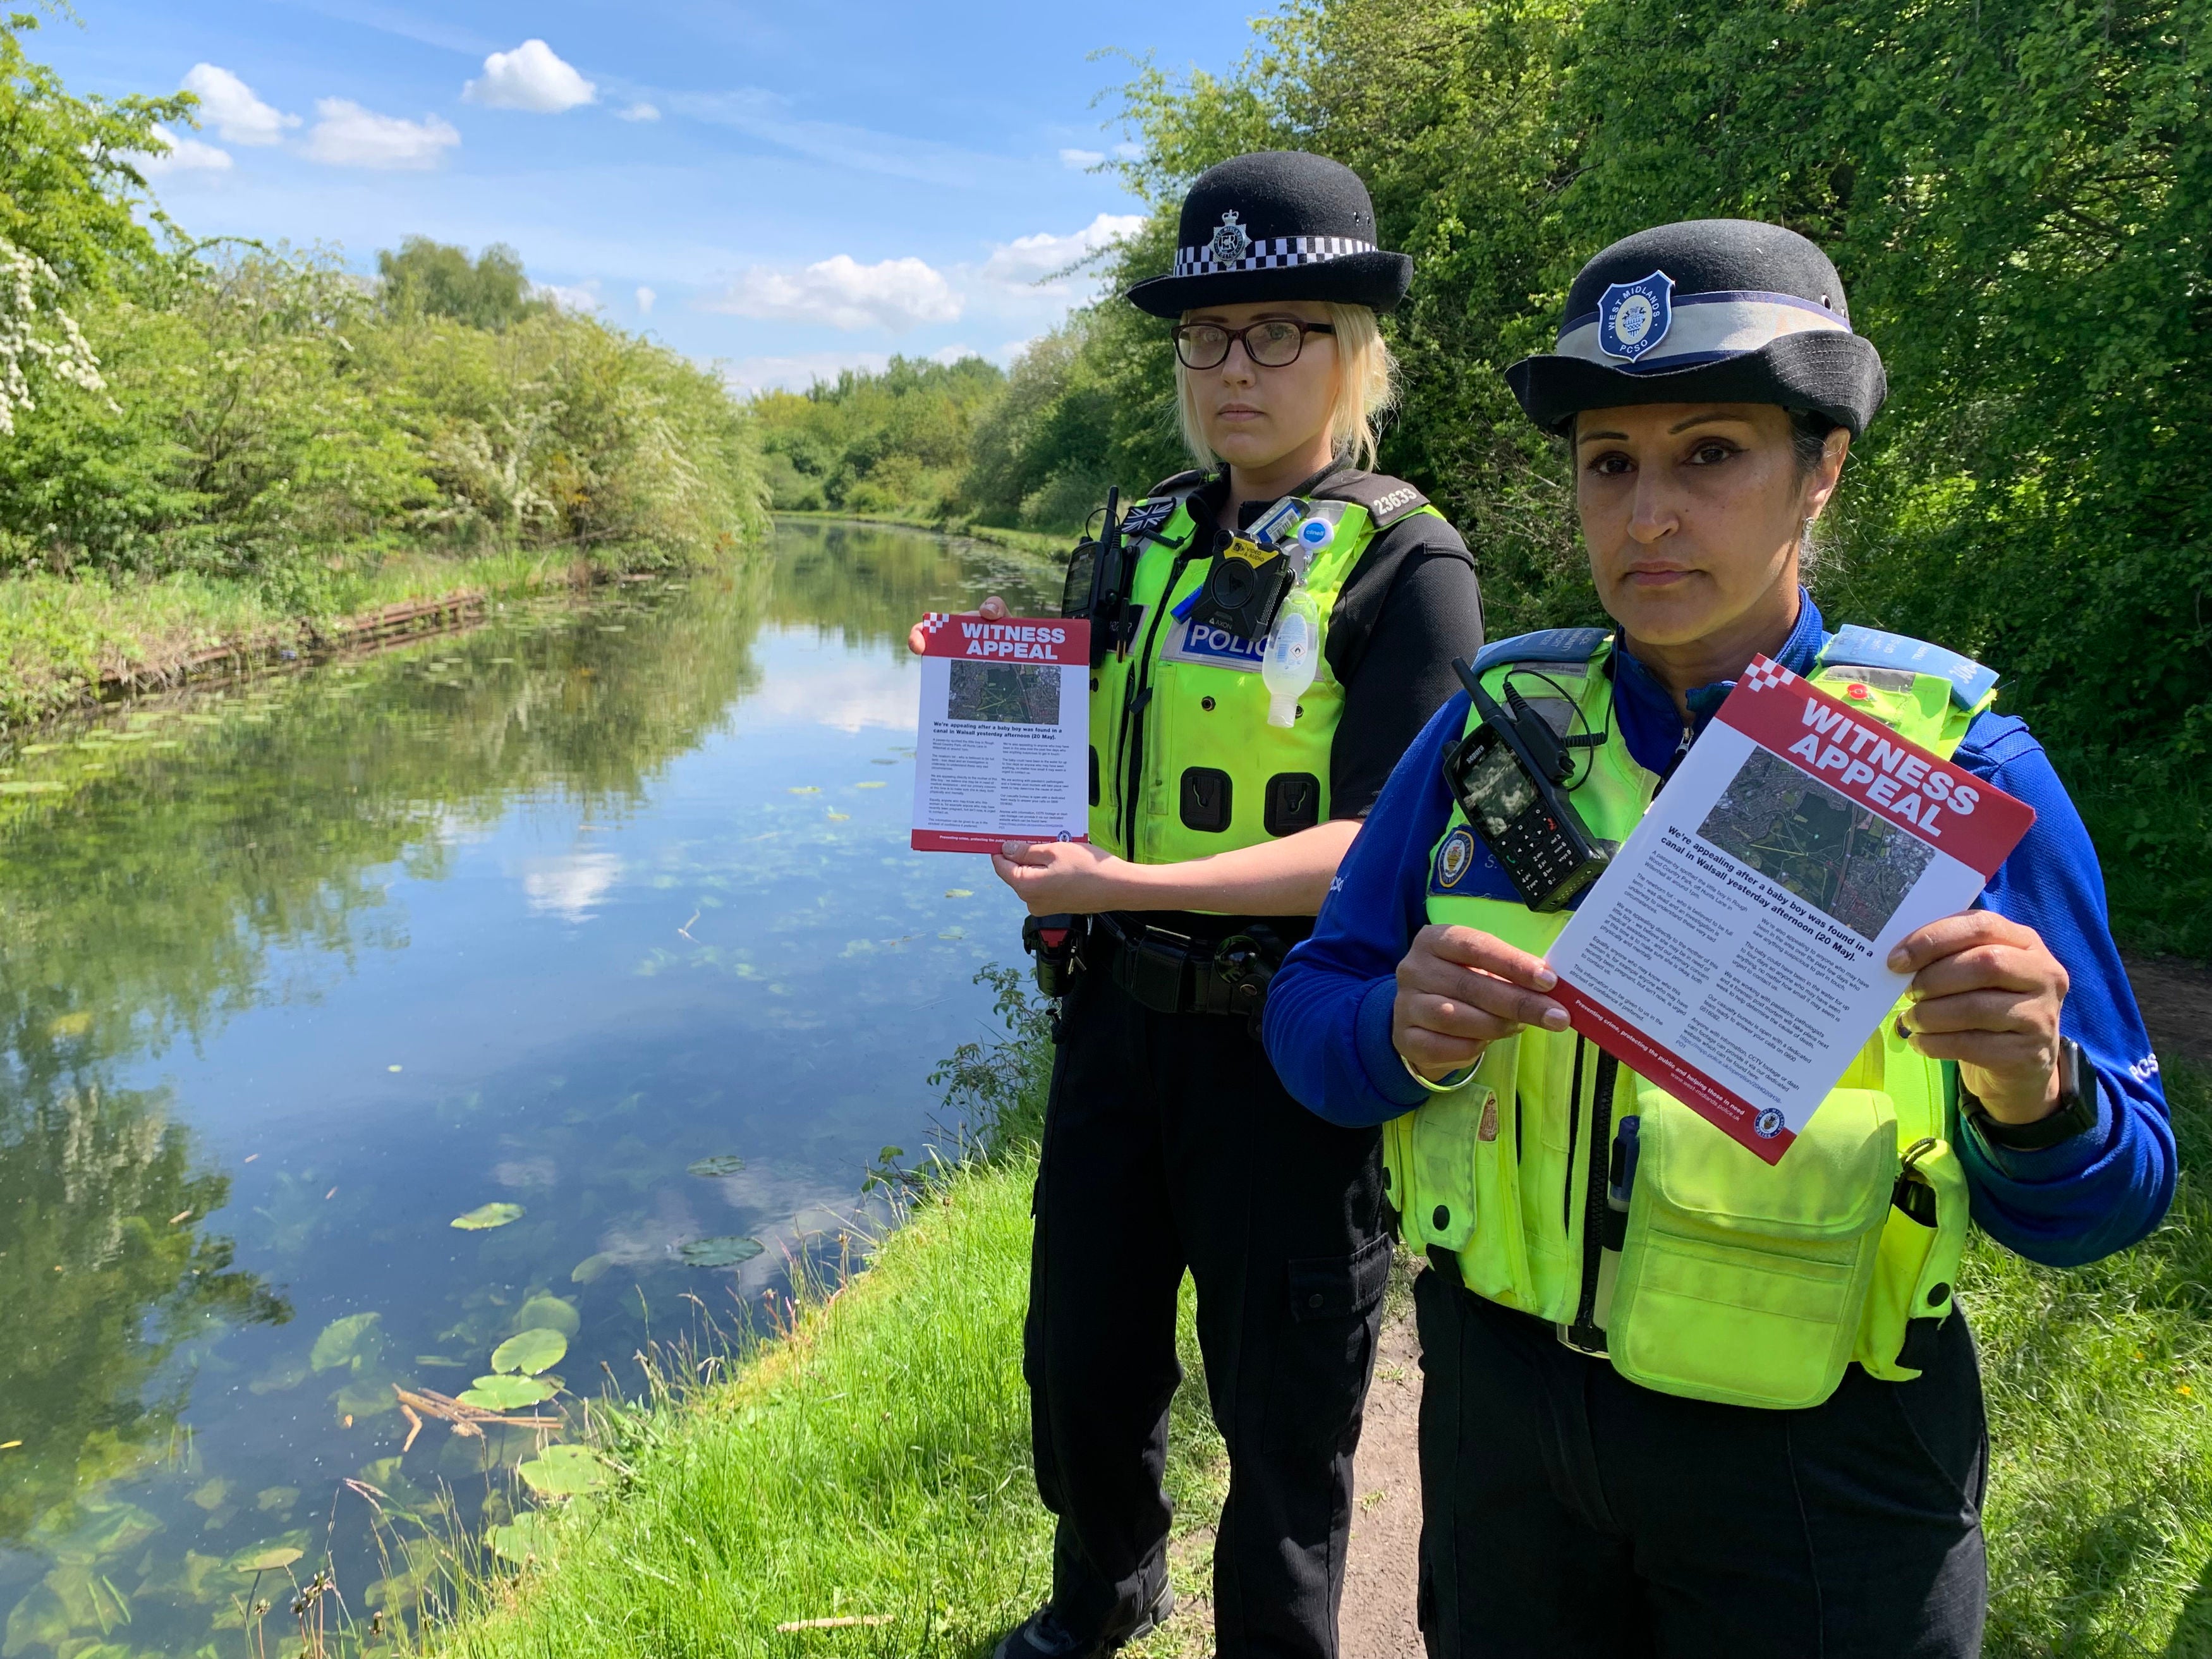 PC Charlotte Gardner and PCSO Suki Lally in Rough Wood country park in Walsall, who have been among officers leafleting the local area to raise awareness about the incident where a dead newborn baby boy was found in the local canal